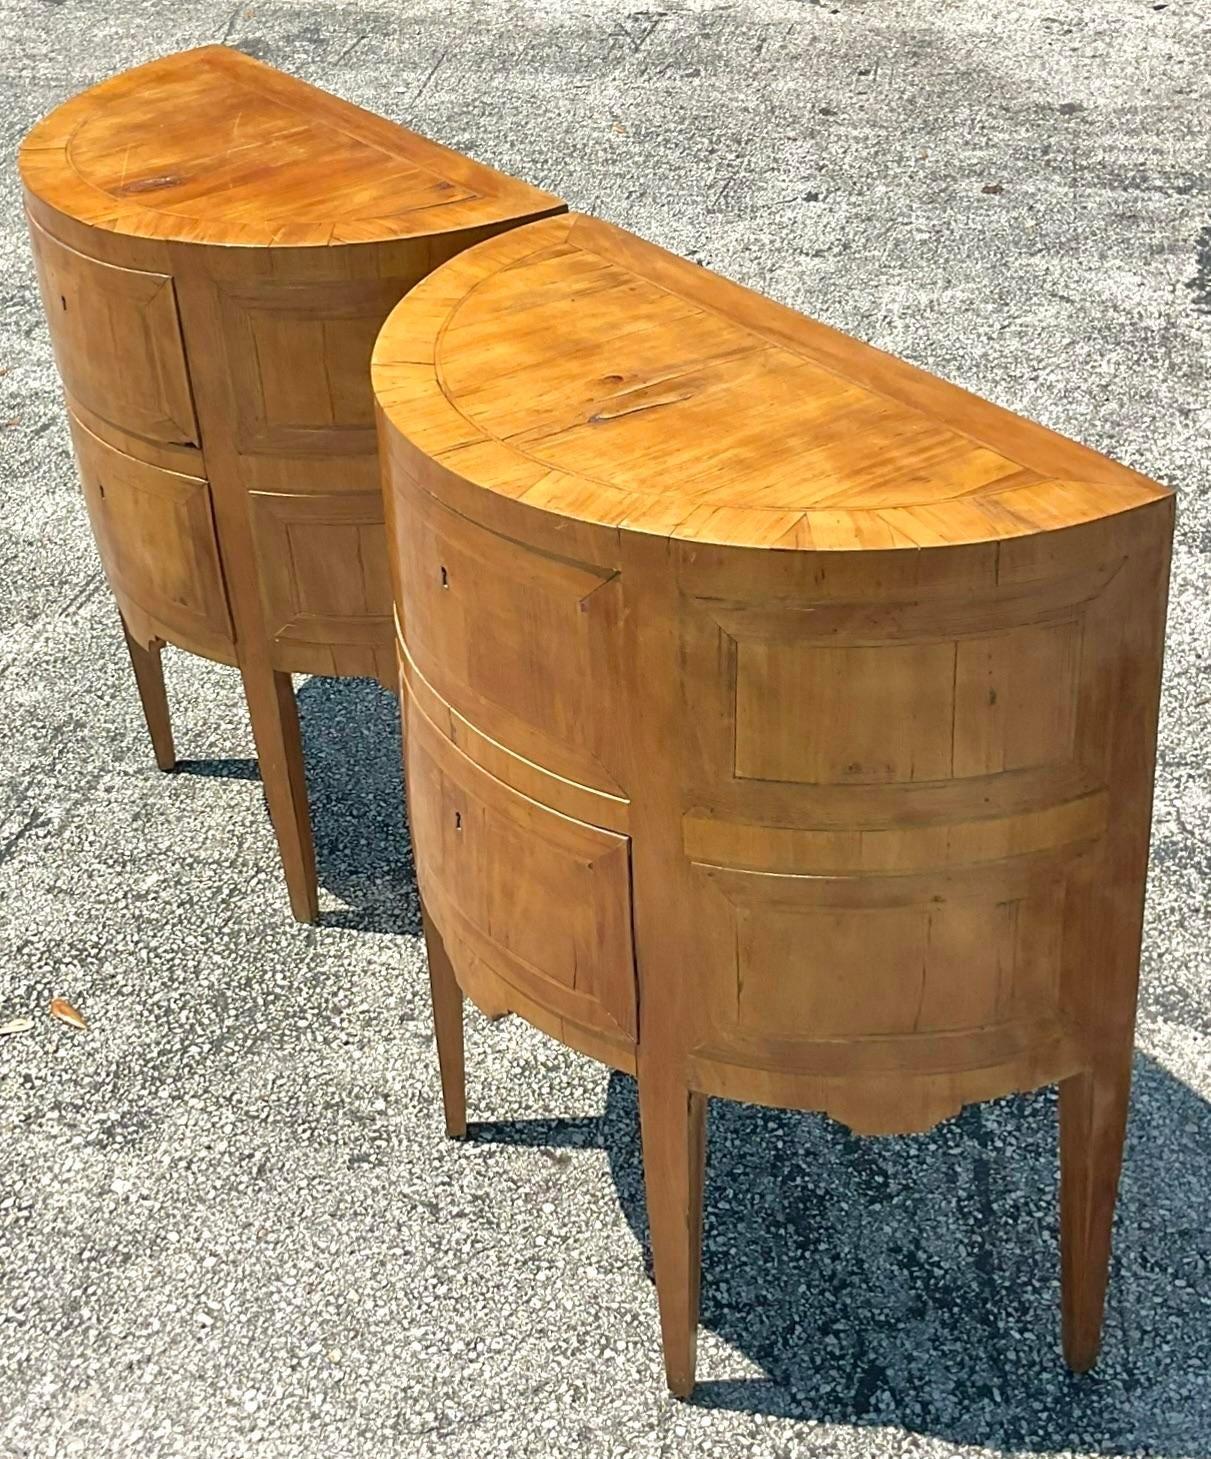 A spectacular pair of vintage Boho chest of drawers. A chic Demilune shape in a pale Burl wood frame. Incredible wood grain detail. Open with a key. Acquired from a Palm Beach estate.